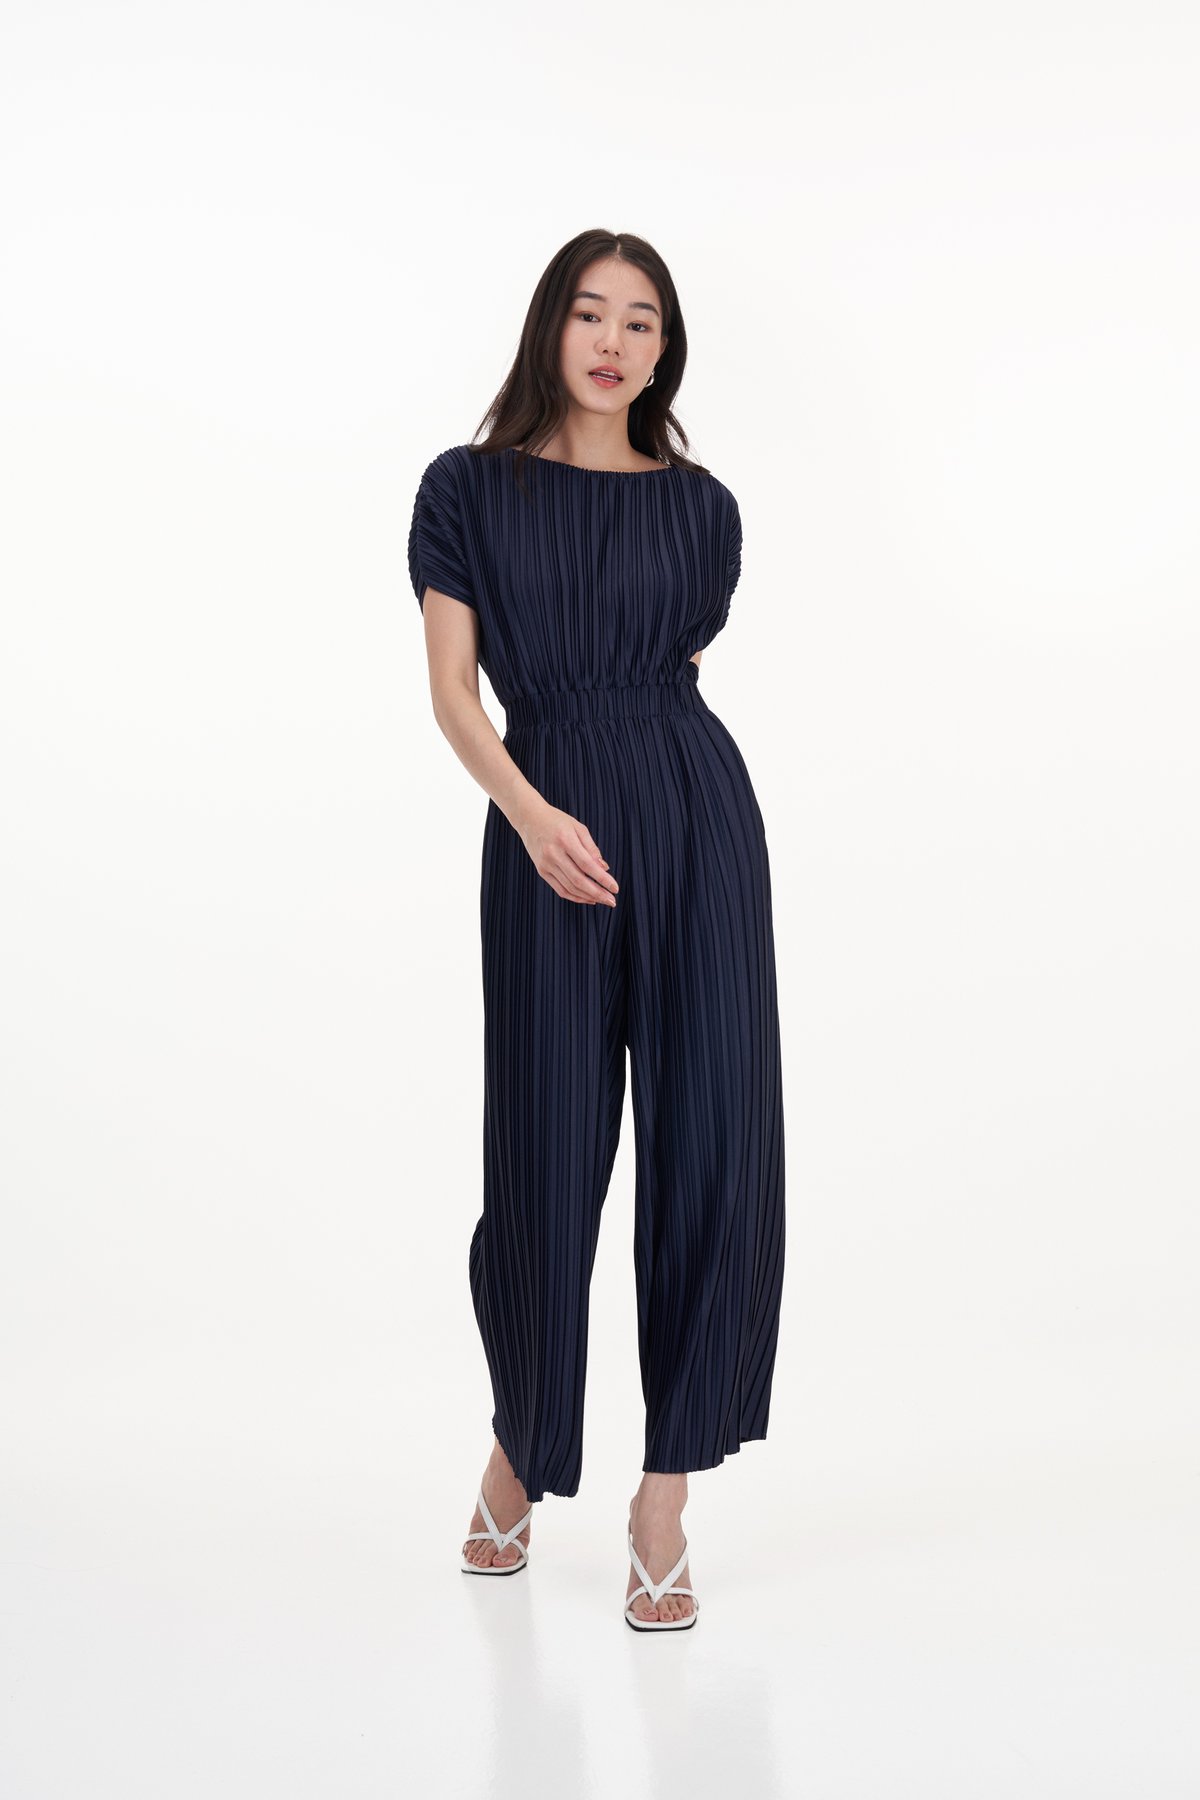 Emerson Multiway Pleated Jumpsuit in Navy